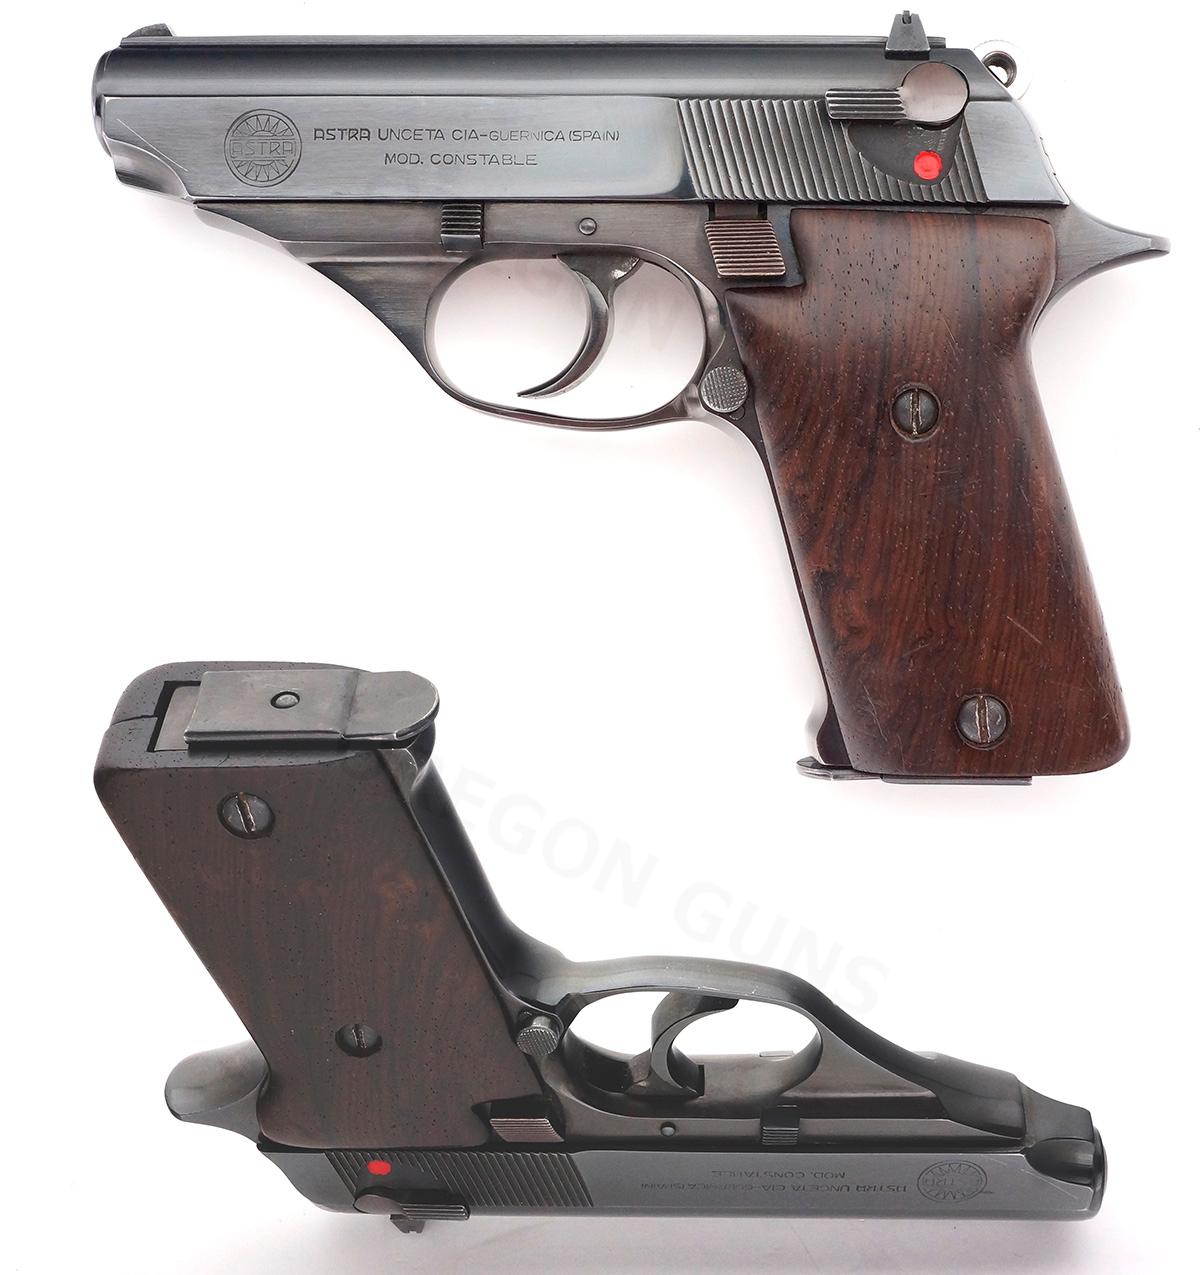 ASTRA - MODEL CONSTABLE .22 LR SEMI PISTOL COPY OF WALTHER FAMOUS PPK SN# 1296640 - Picture 2